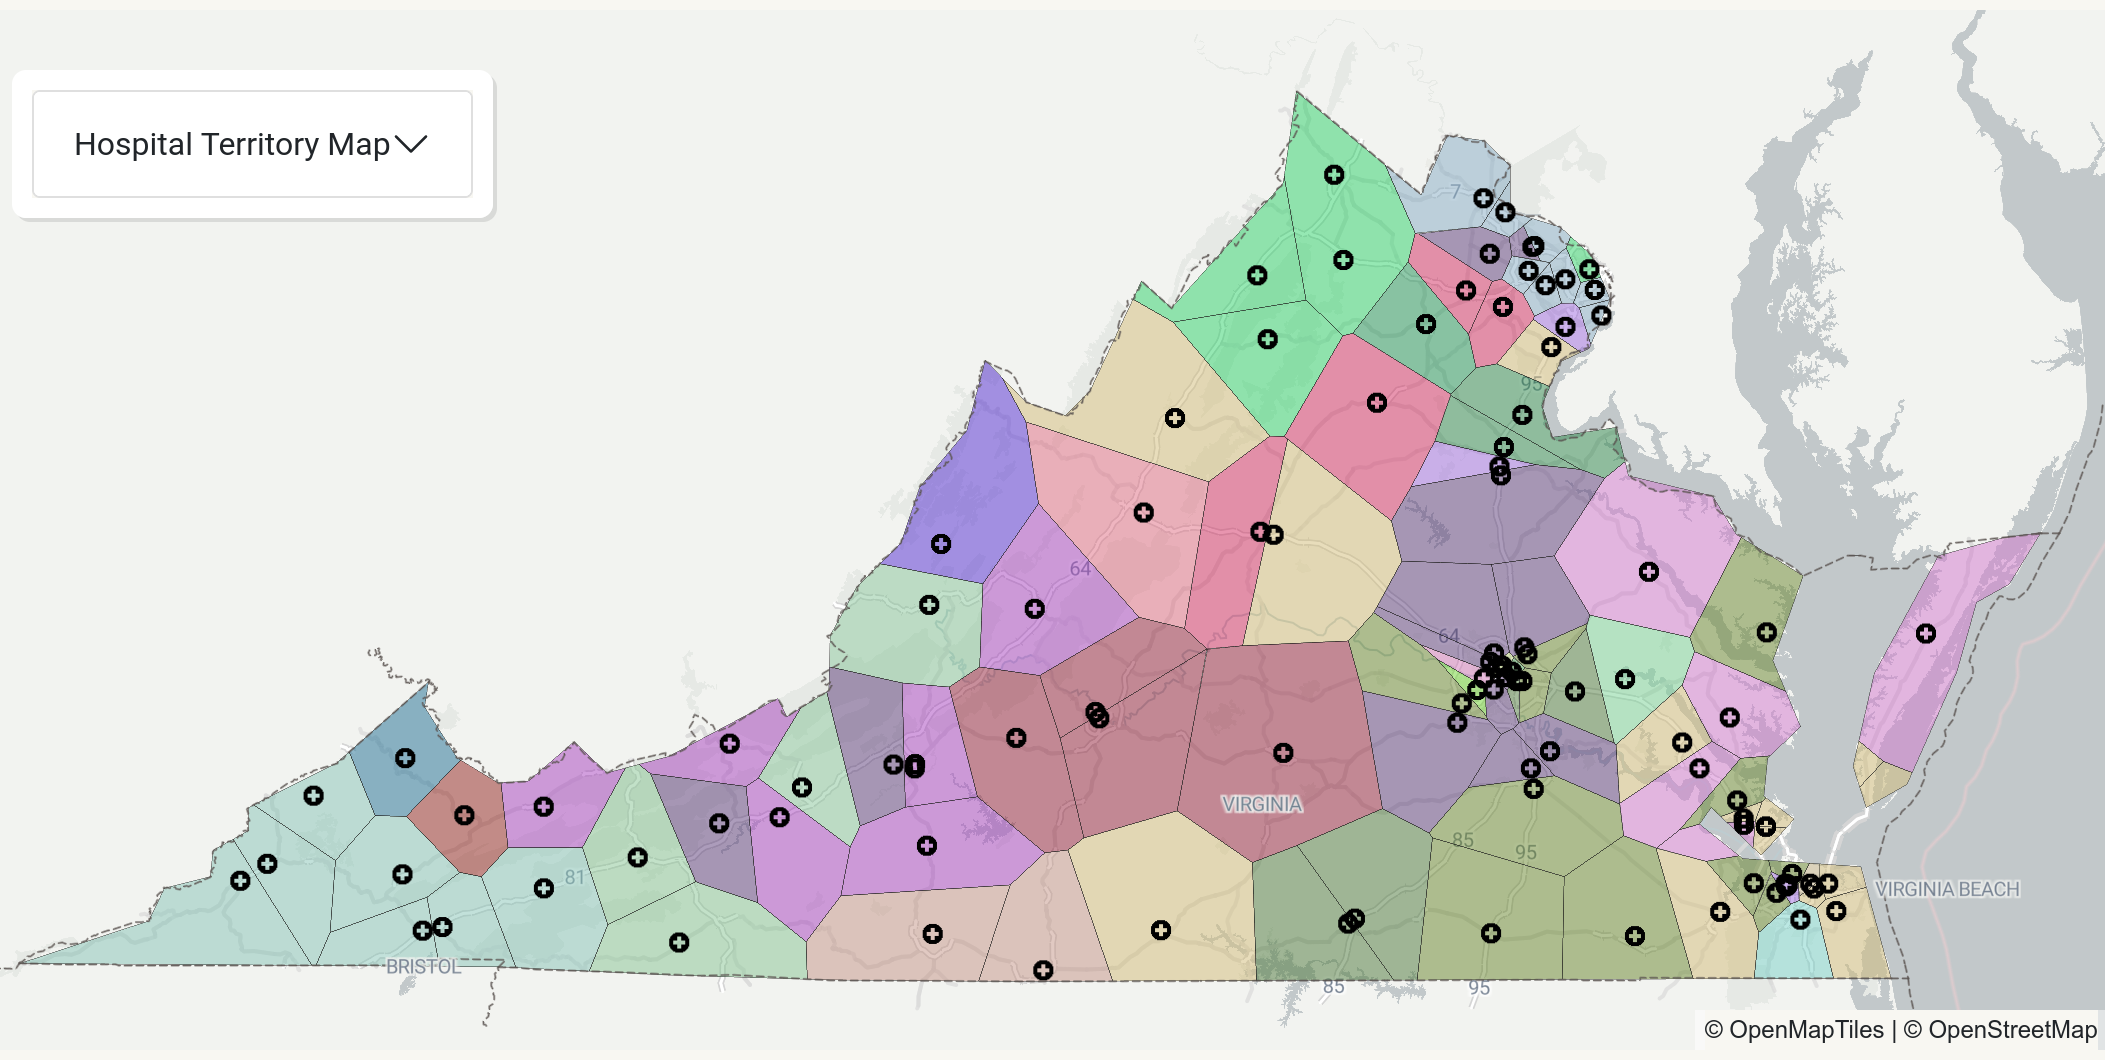 A colored map showing hospital ownership in Virginia.